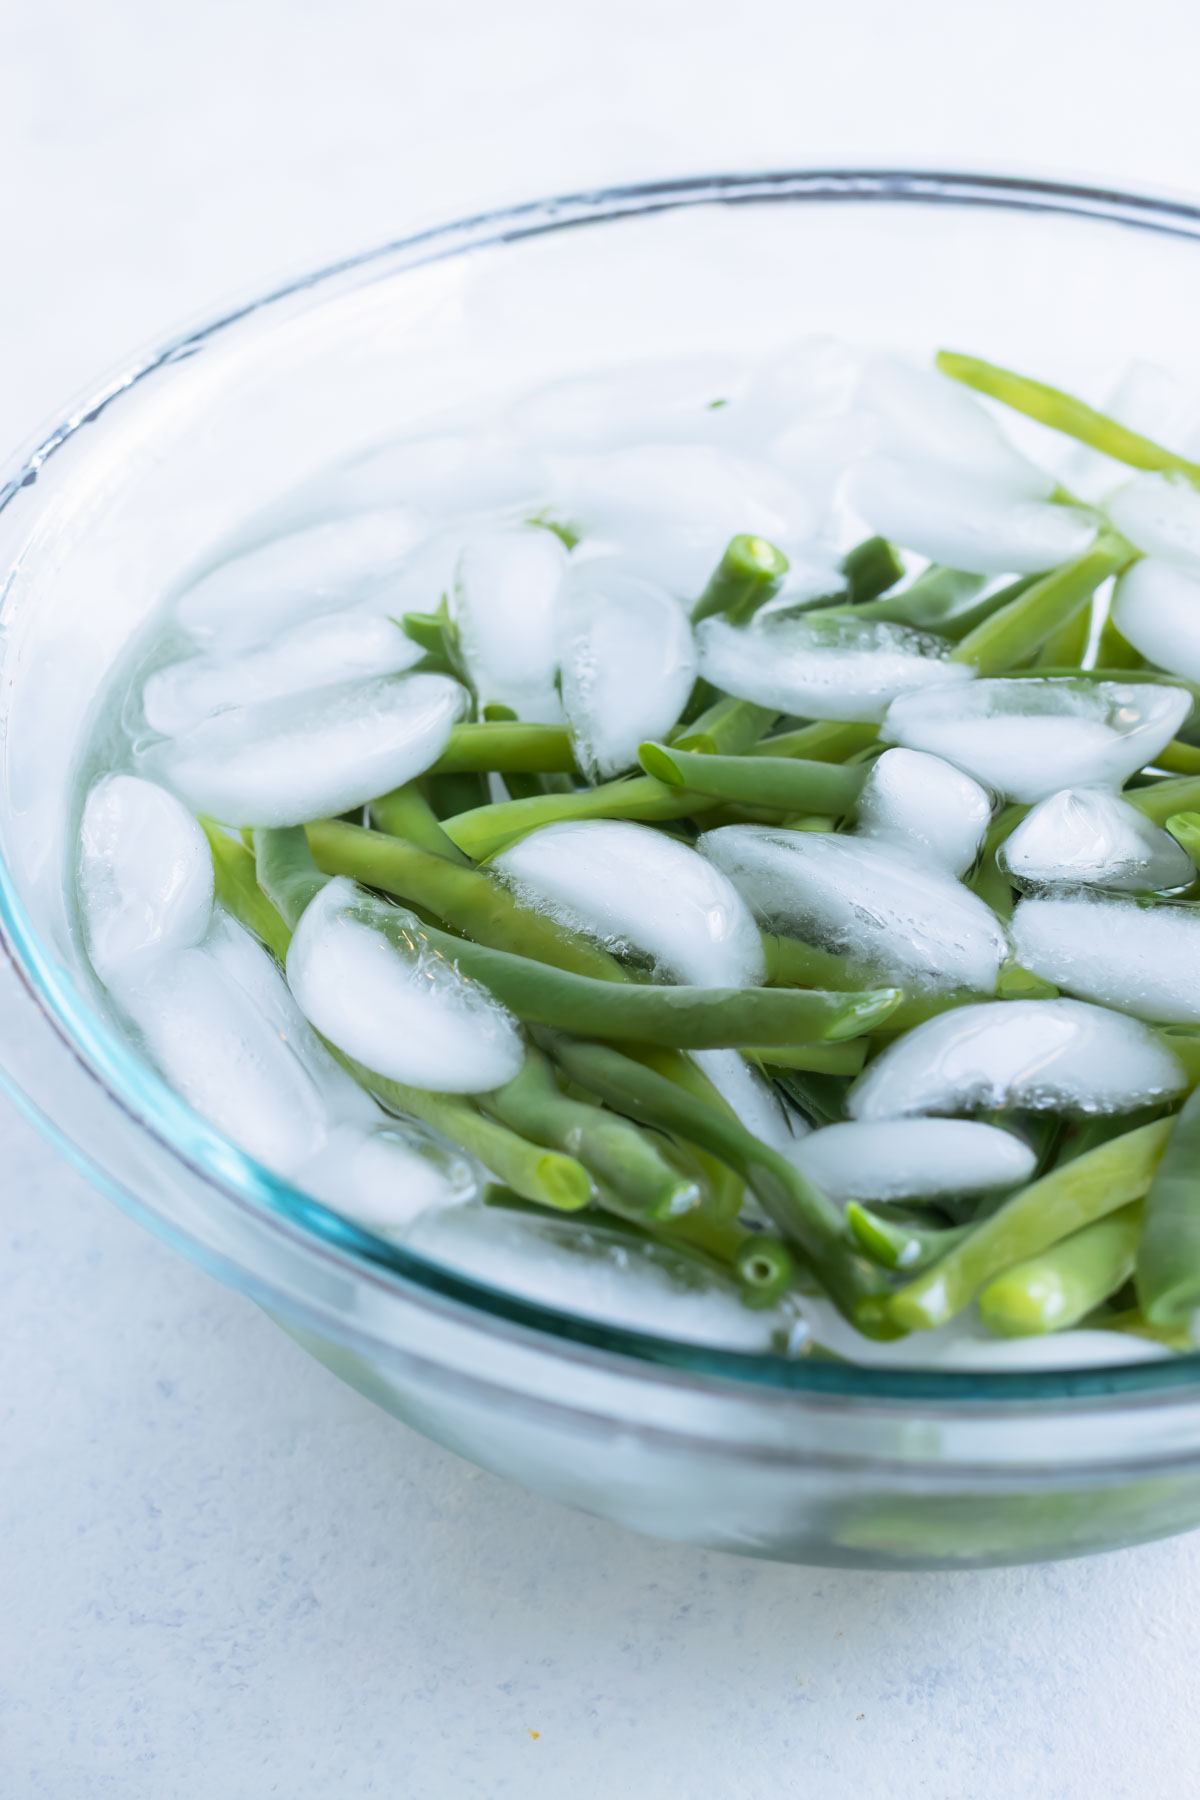 A bowl full of ice and water is used to blanch the beans.